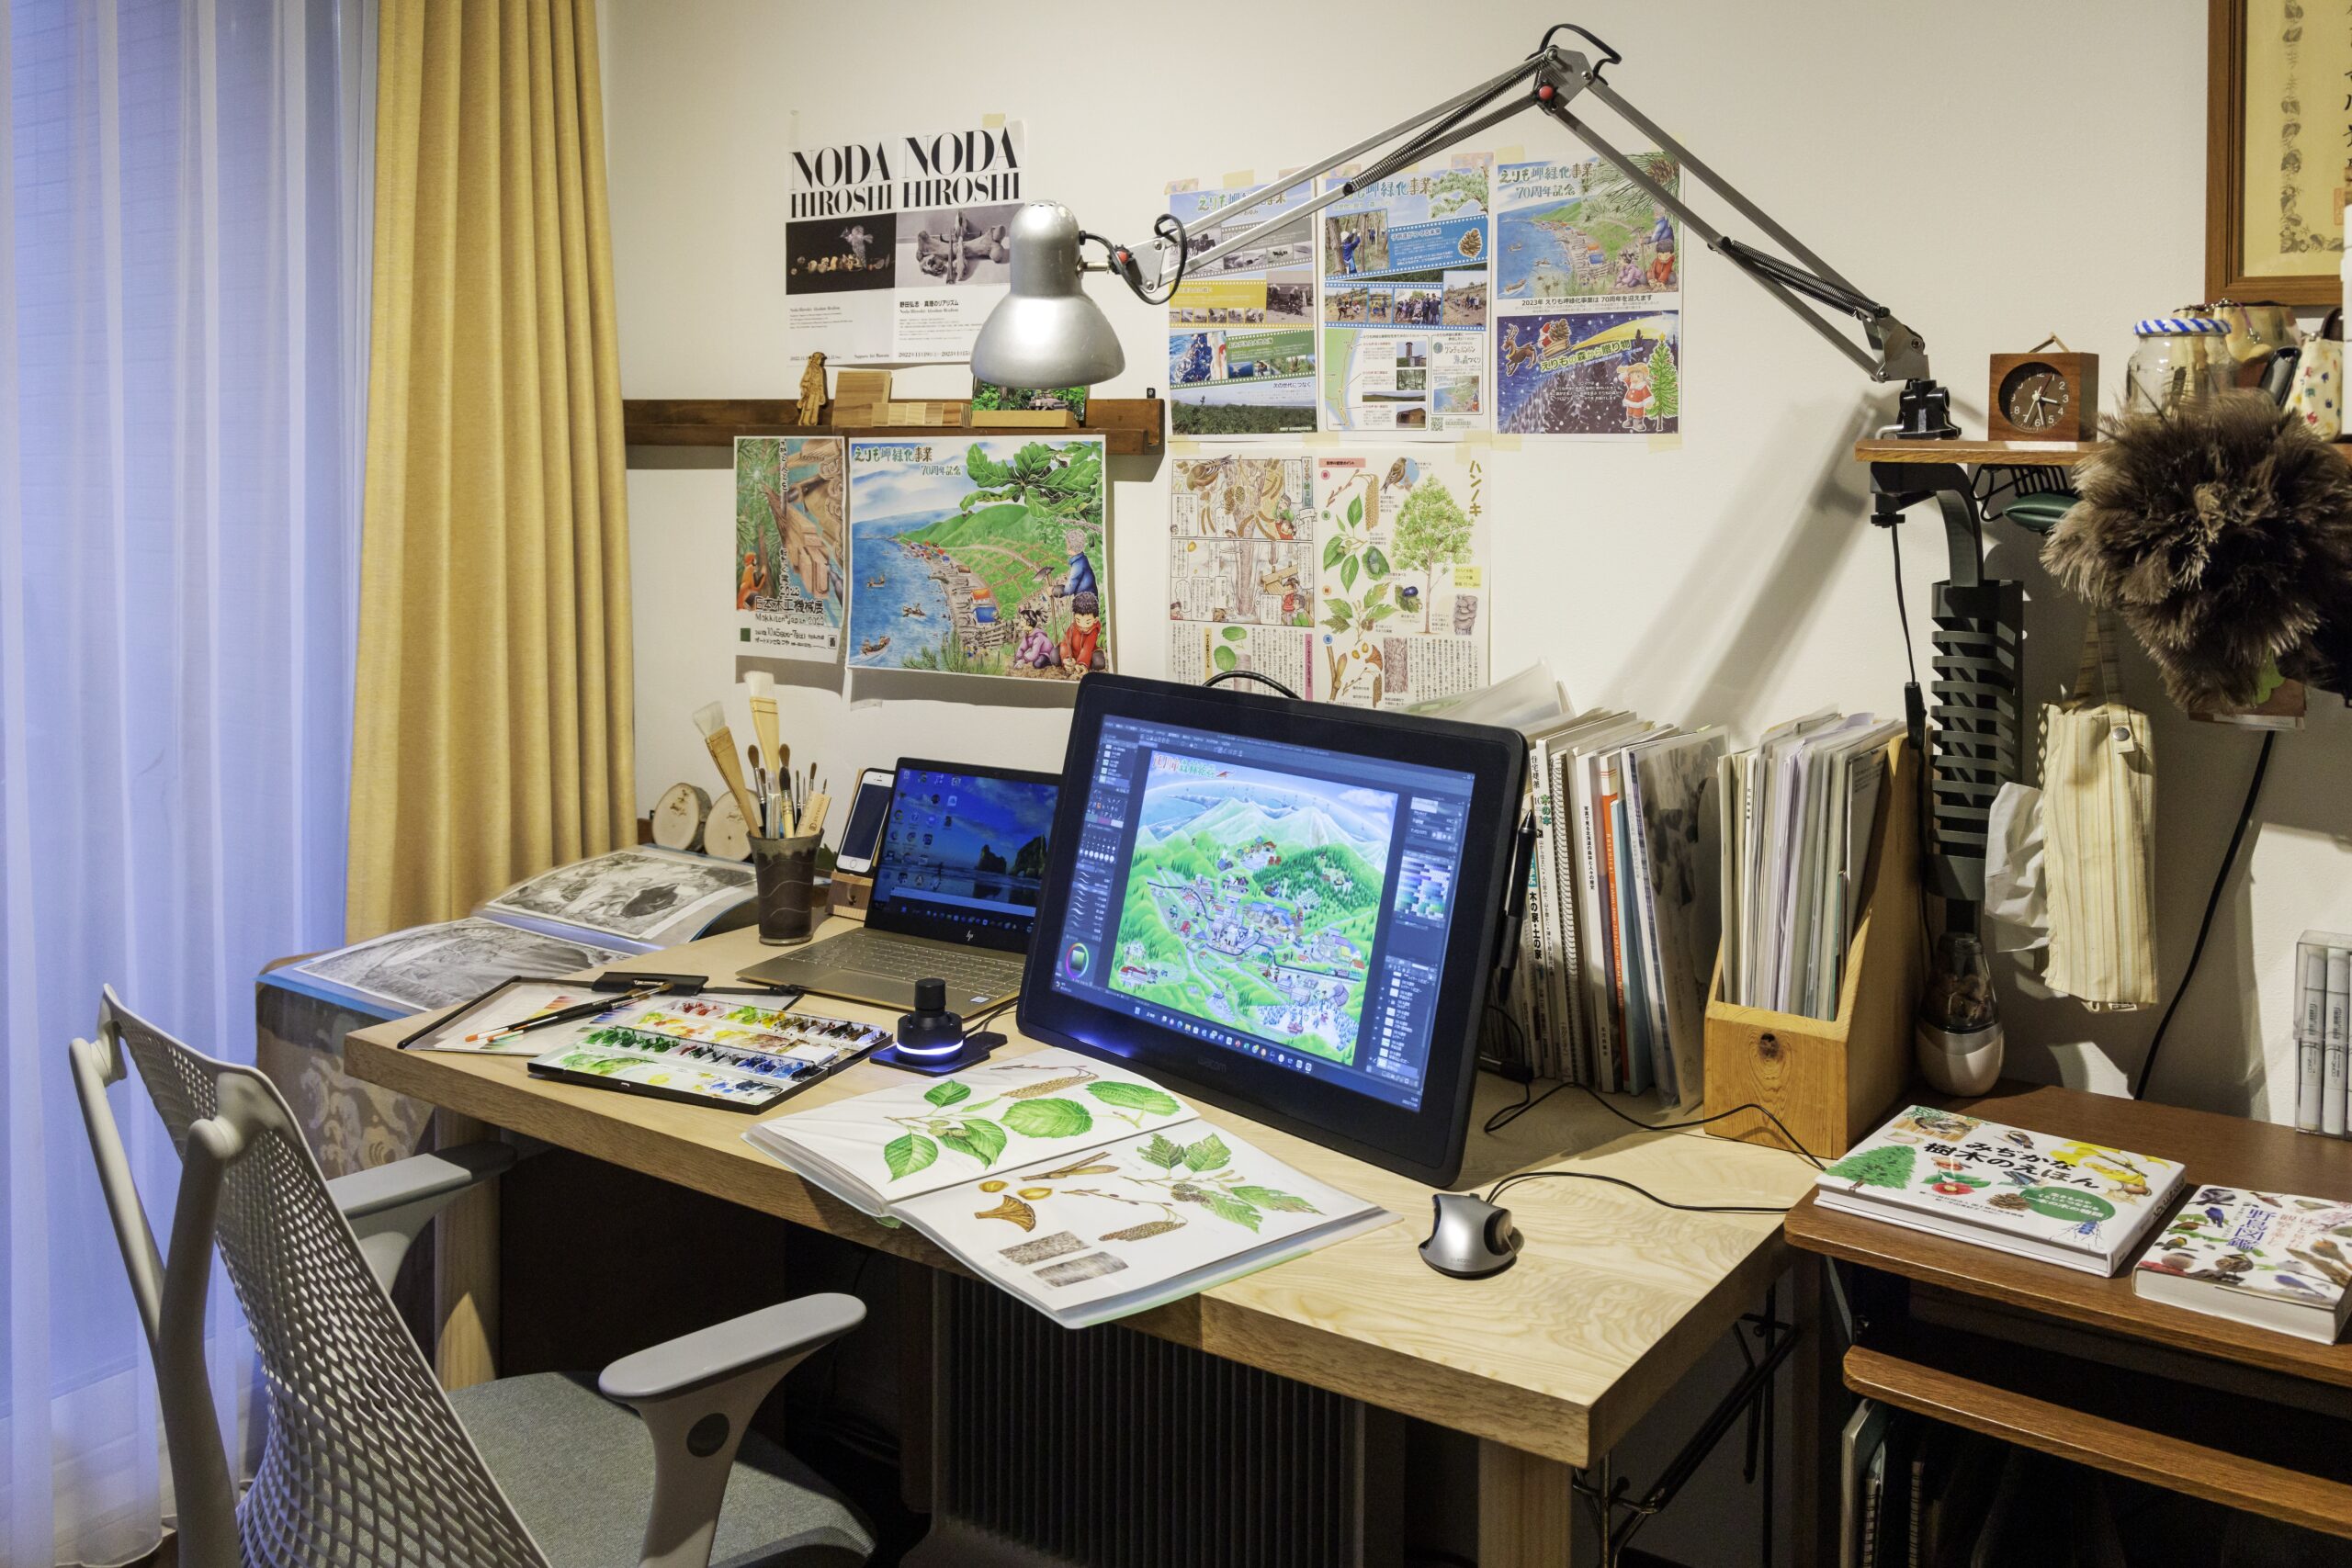 Hirata’s study in her house.